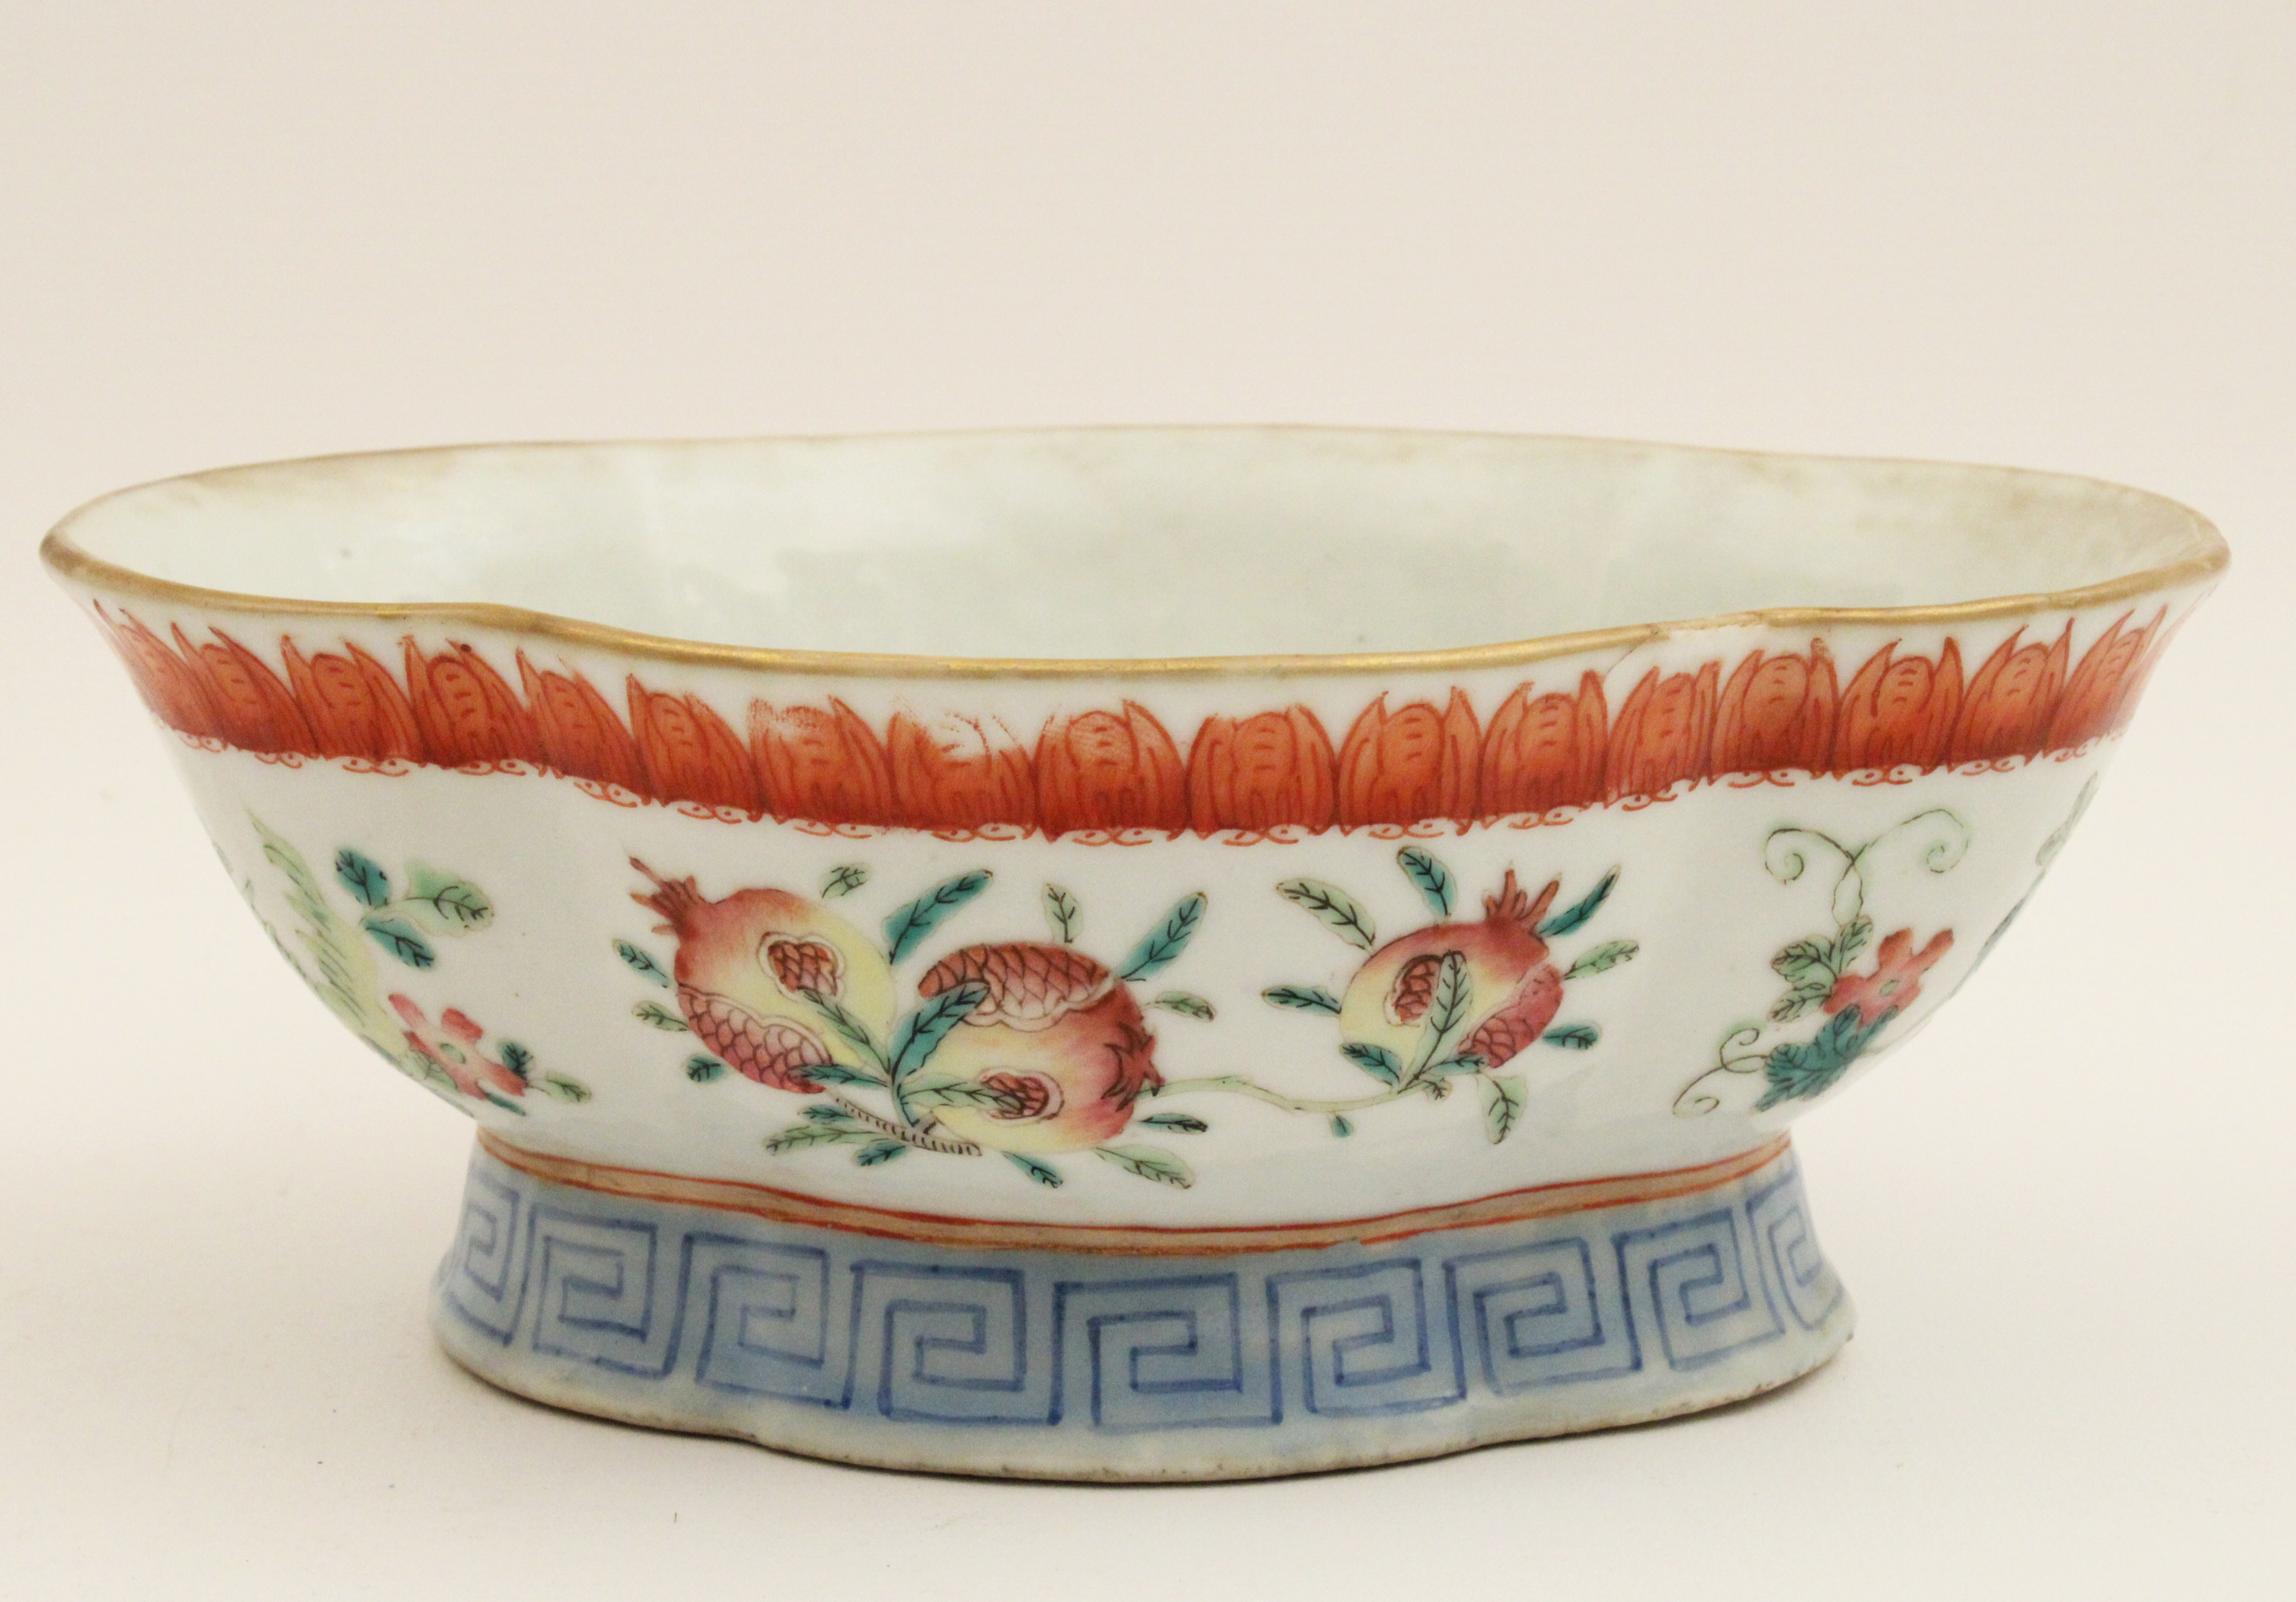 LATE QING DYNASTY PORCELAIN FOOTED 35f850